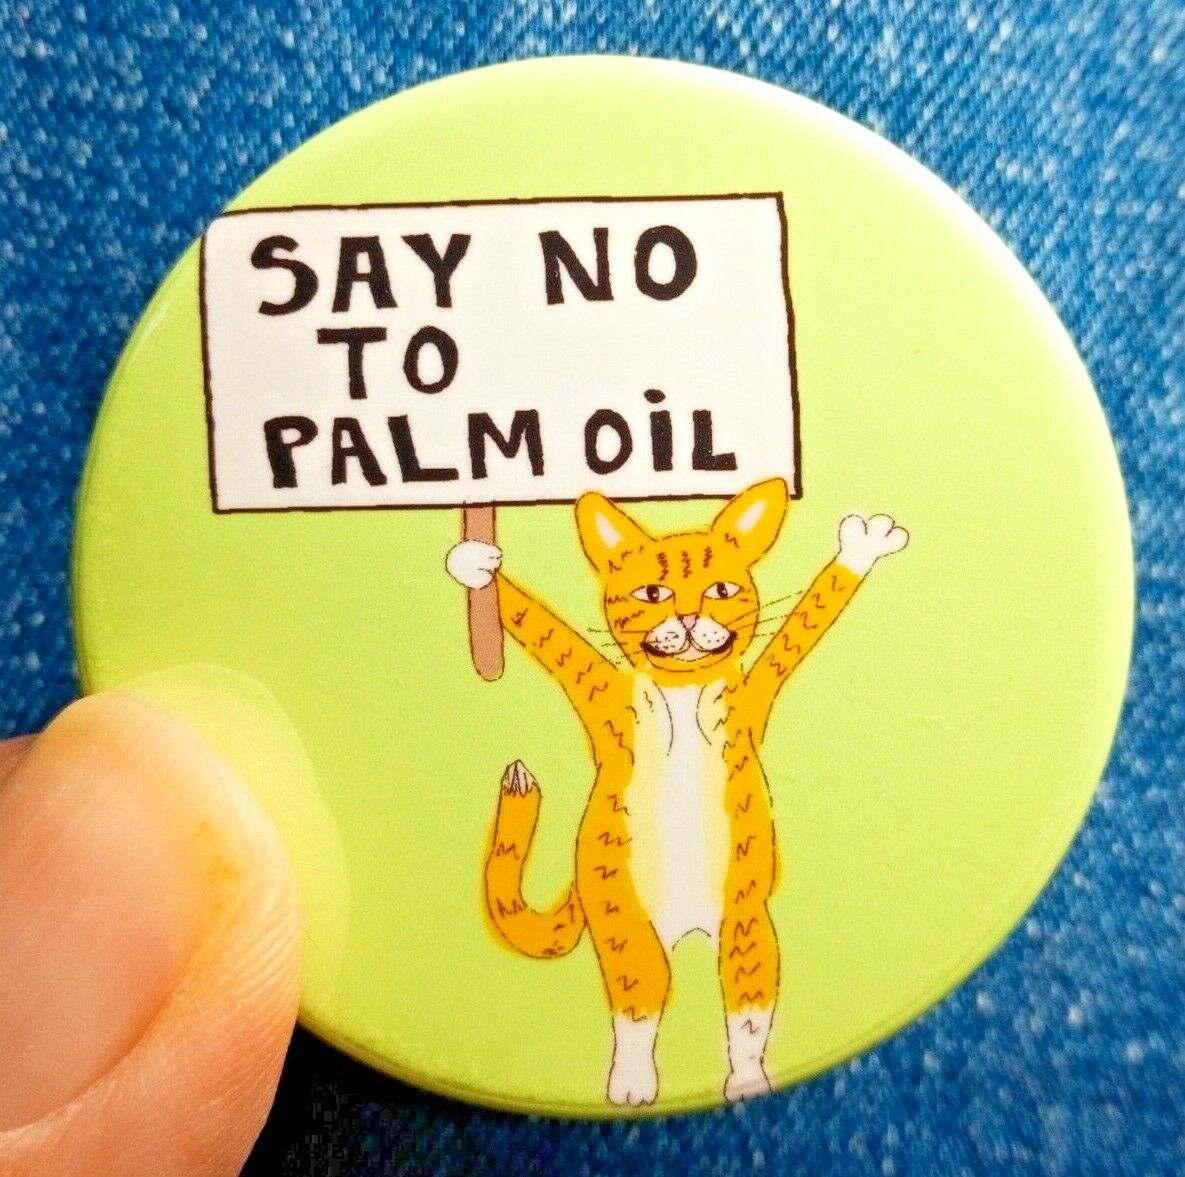 Say No to Palm oil pin badge climate change environment greenhouse gas forest